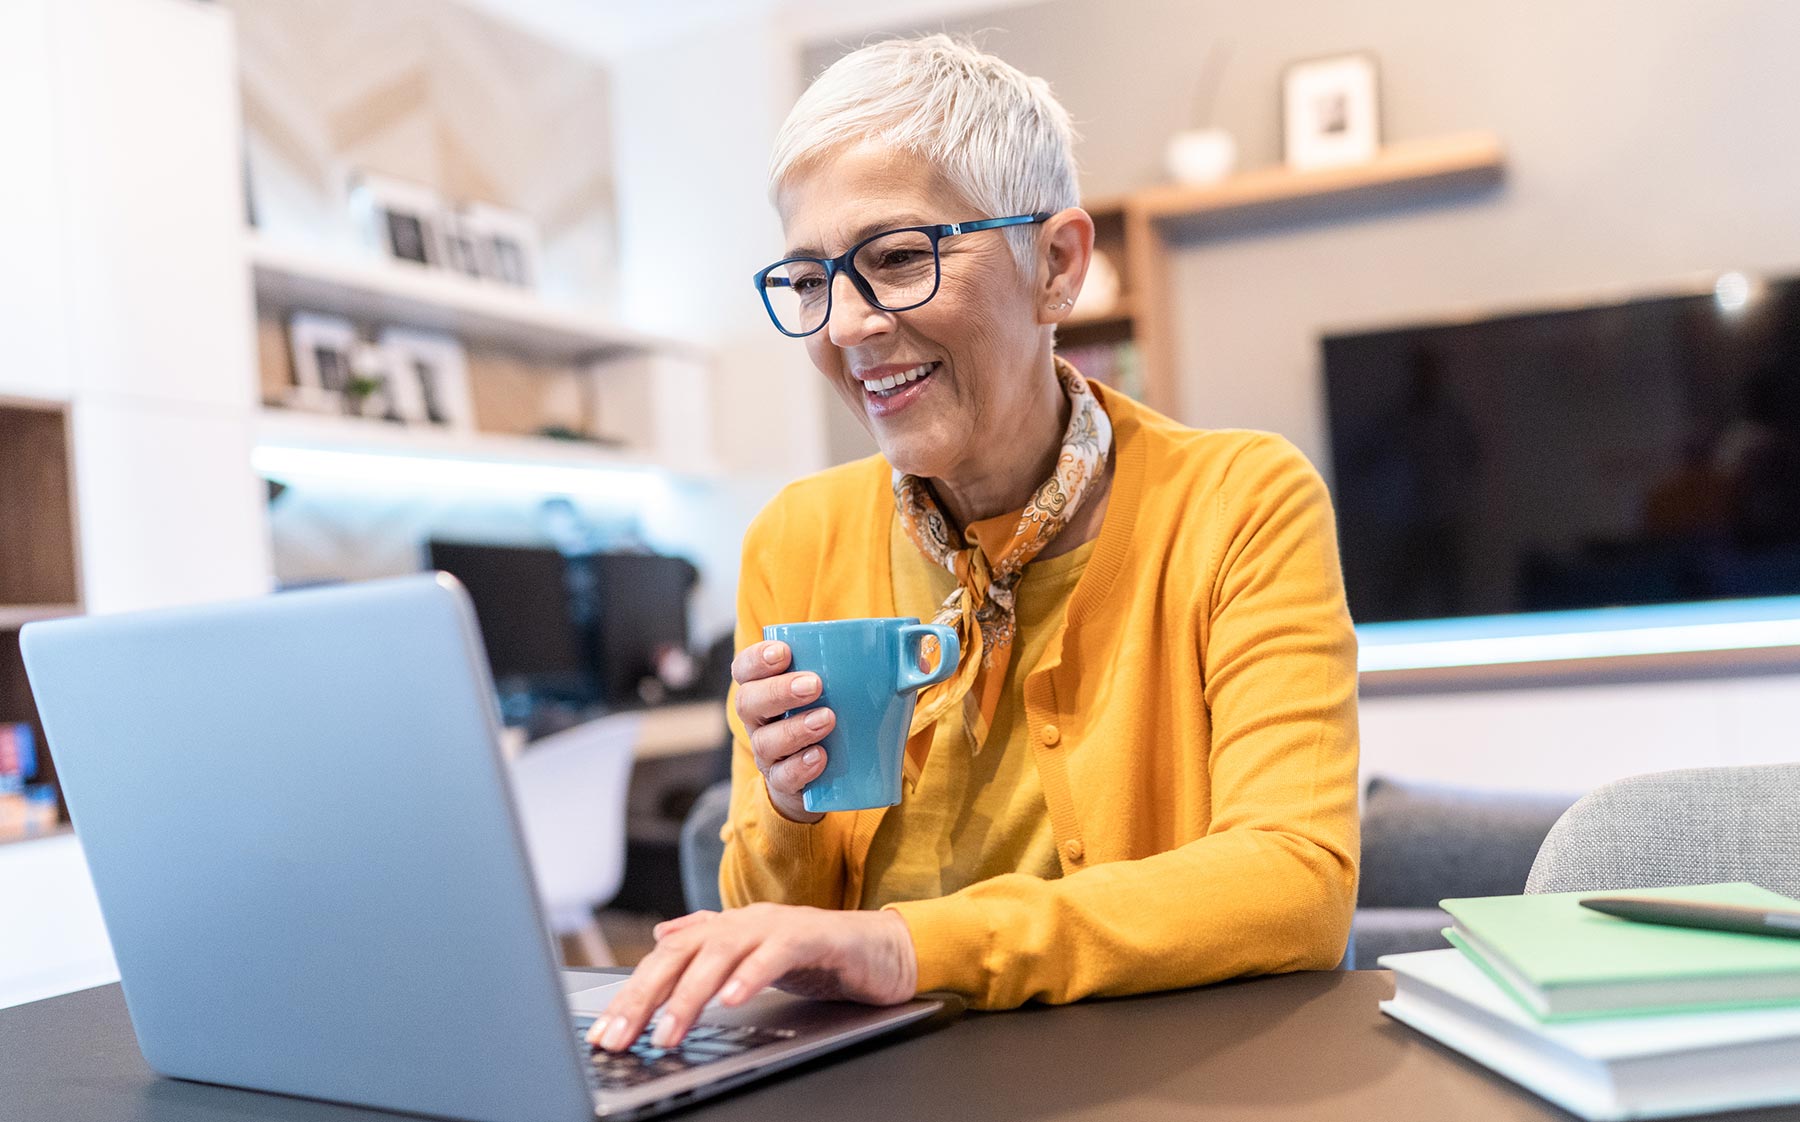 senior woman holding a coffee mug smiling and looking at her laptop